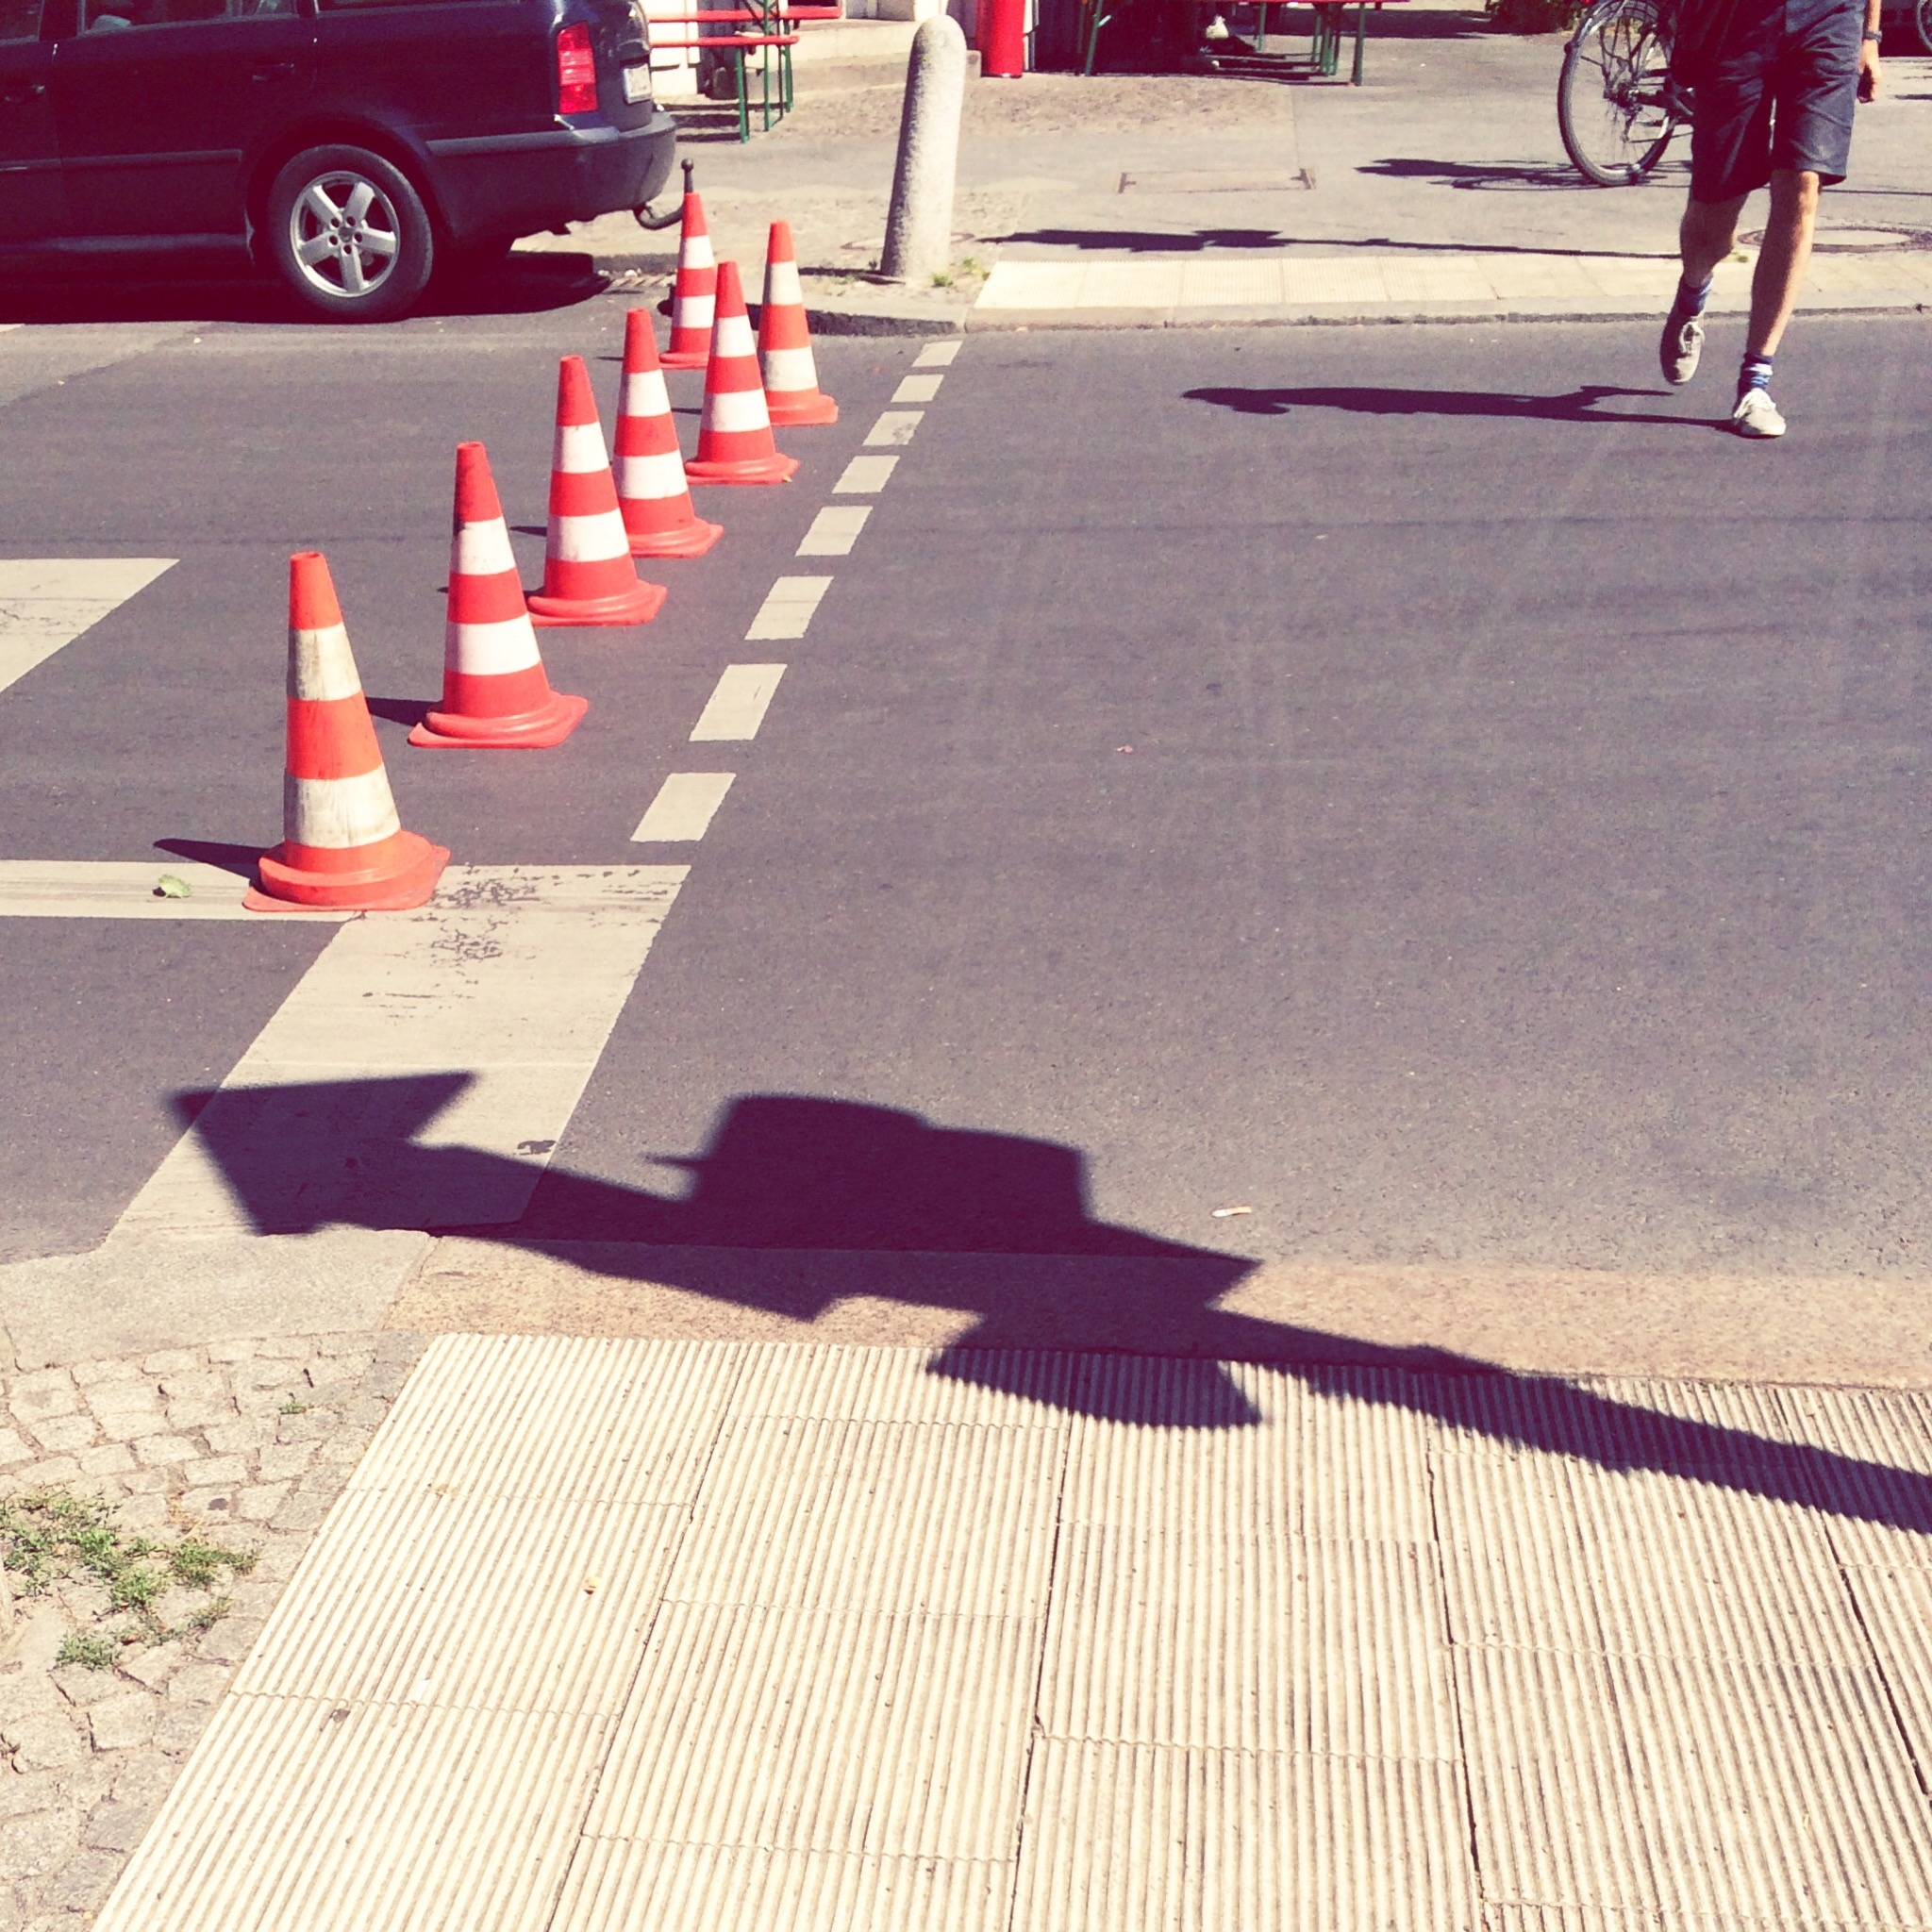 View Of Traffic Cones On The Street